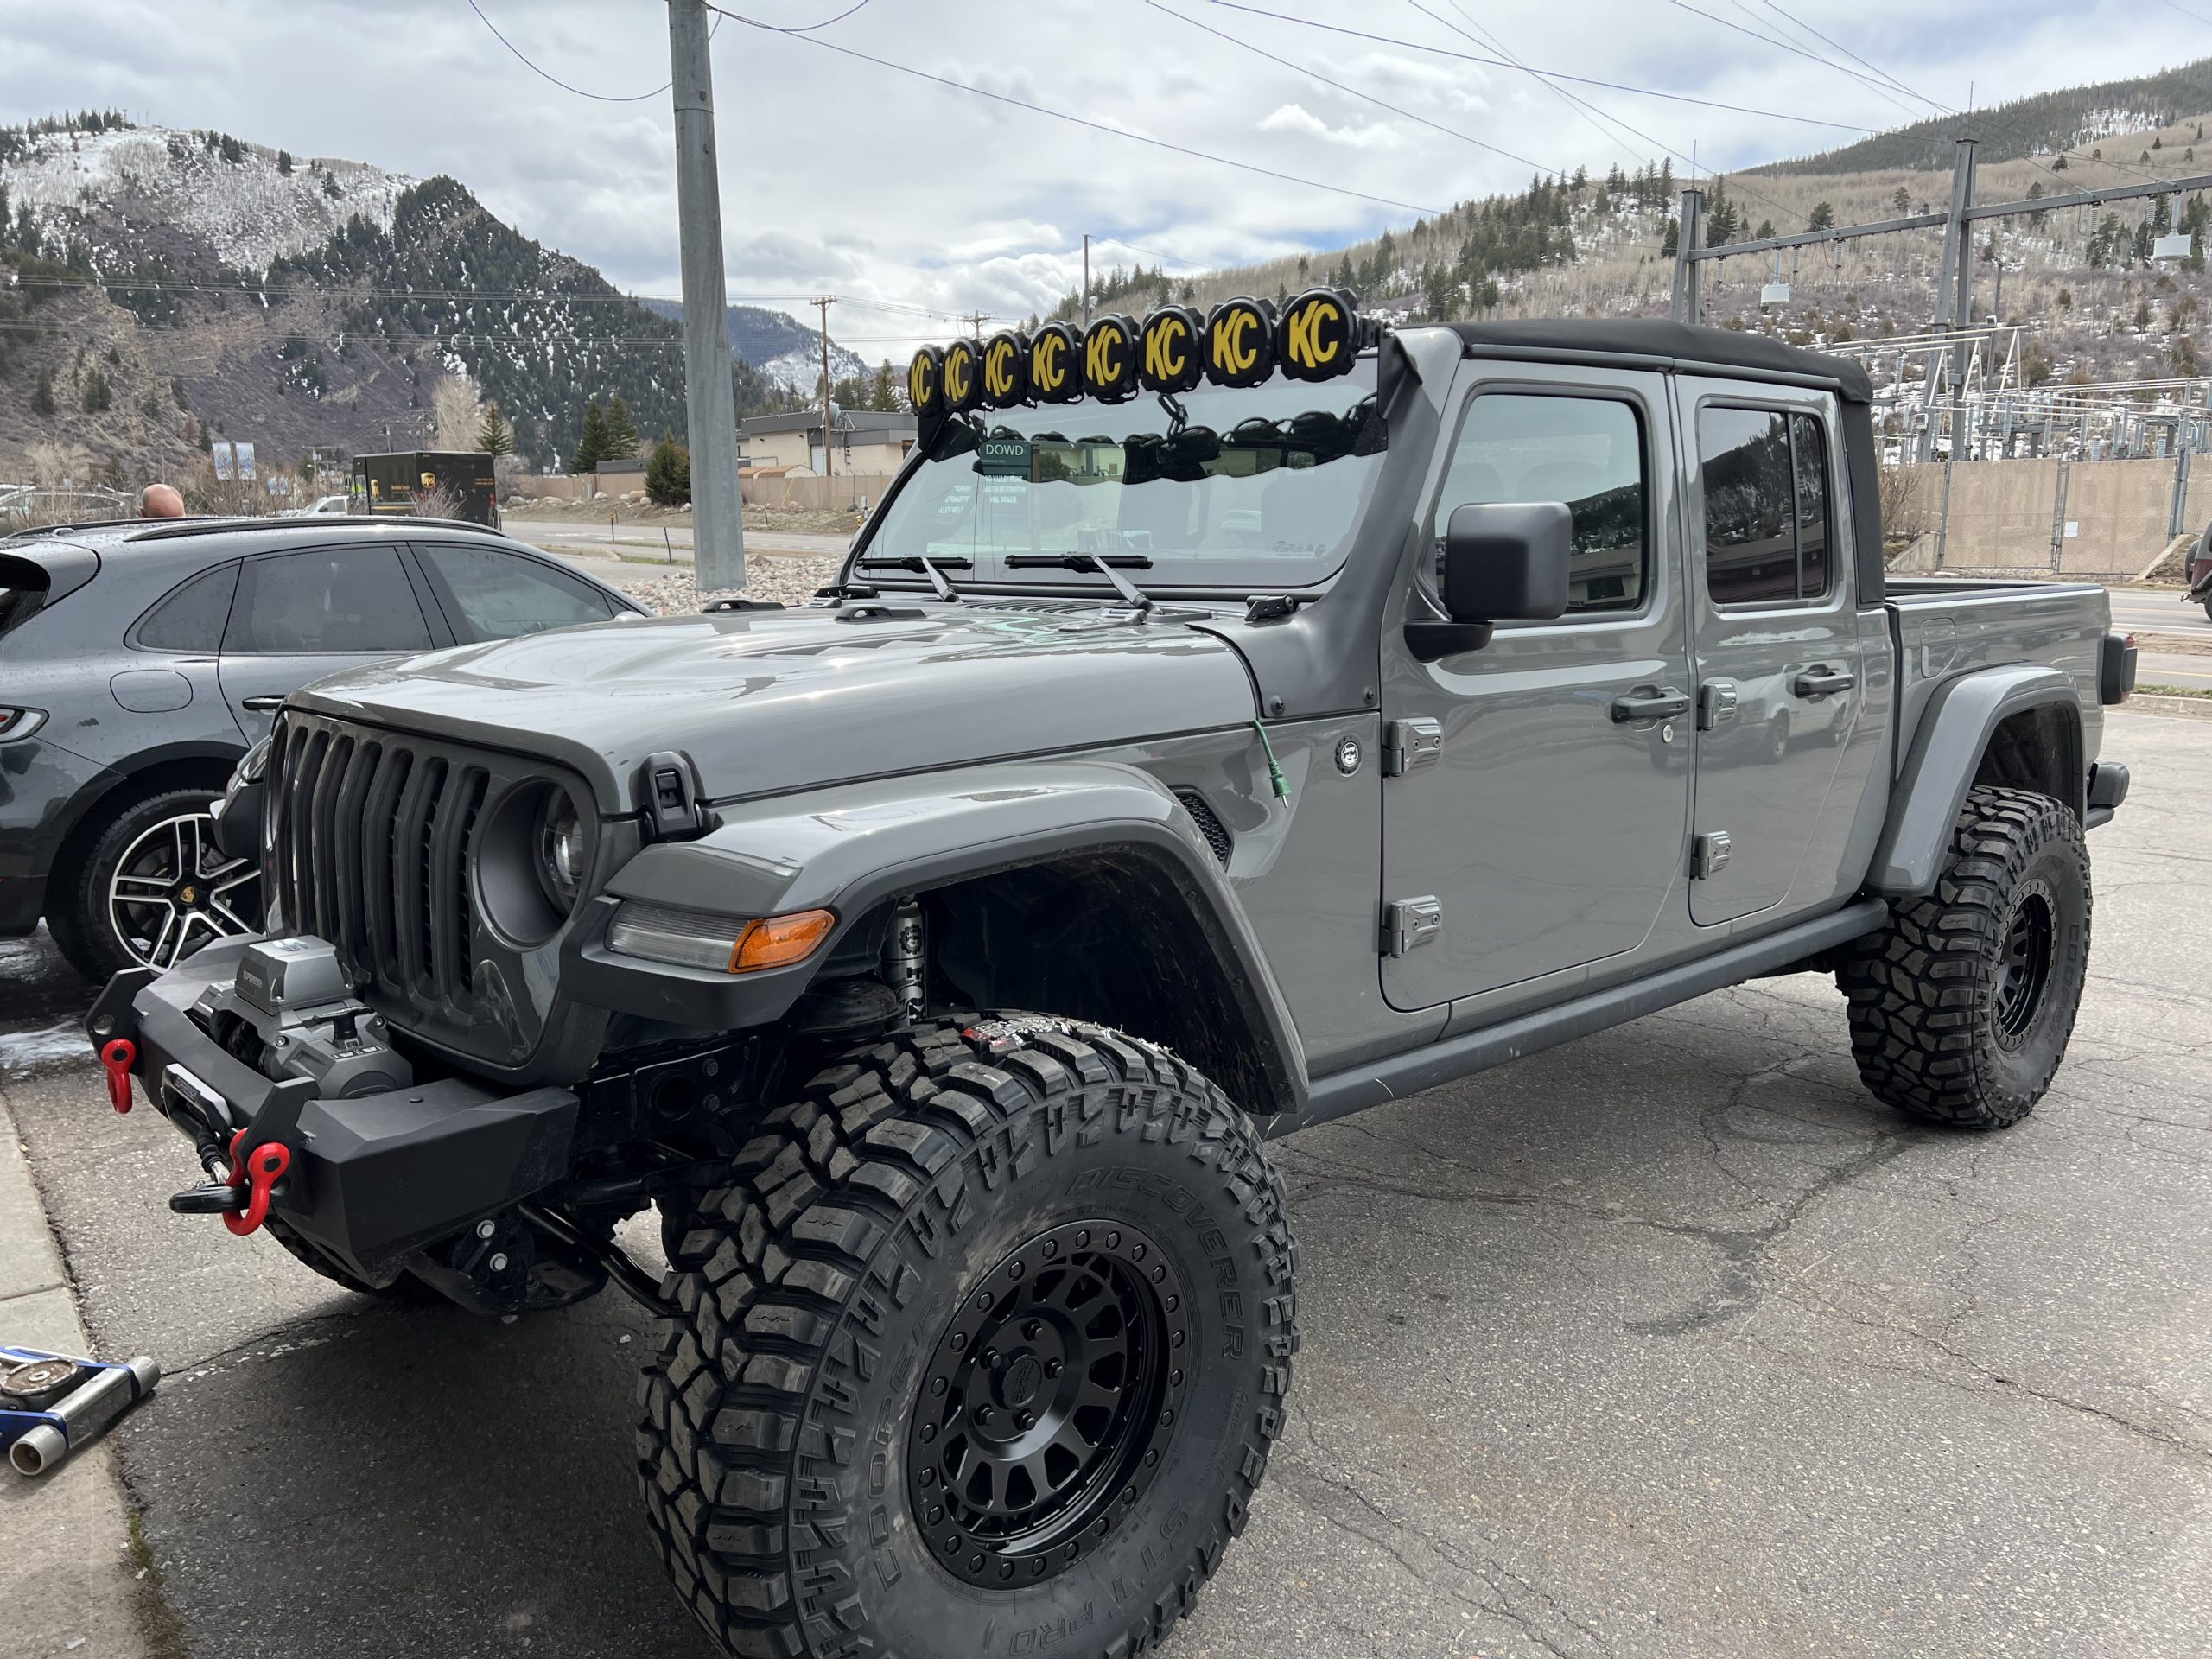 Off Road Jeep Rentals & Unguided Tours near Denver & Vail CO | Vail Extreme  Rentals